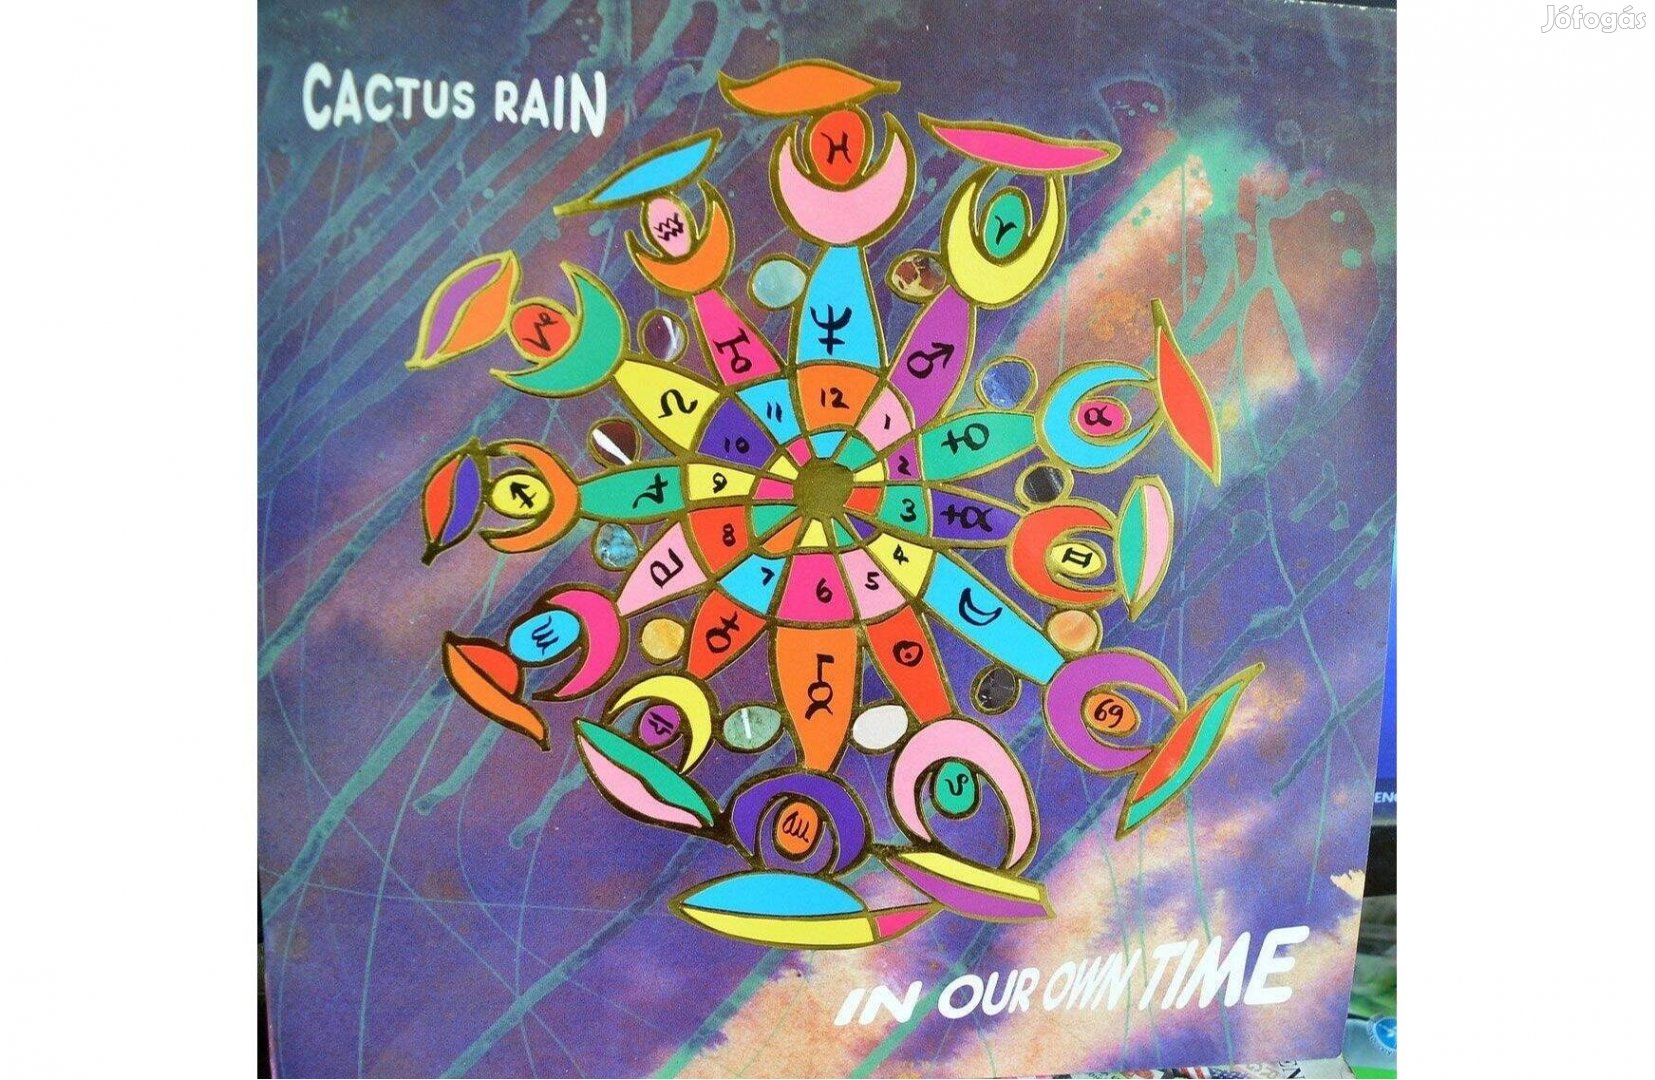 Cactus Rain - In Our Own Time CD